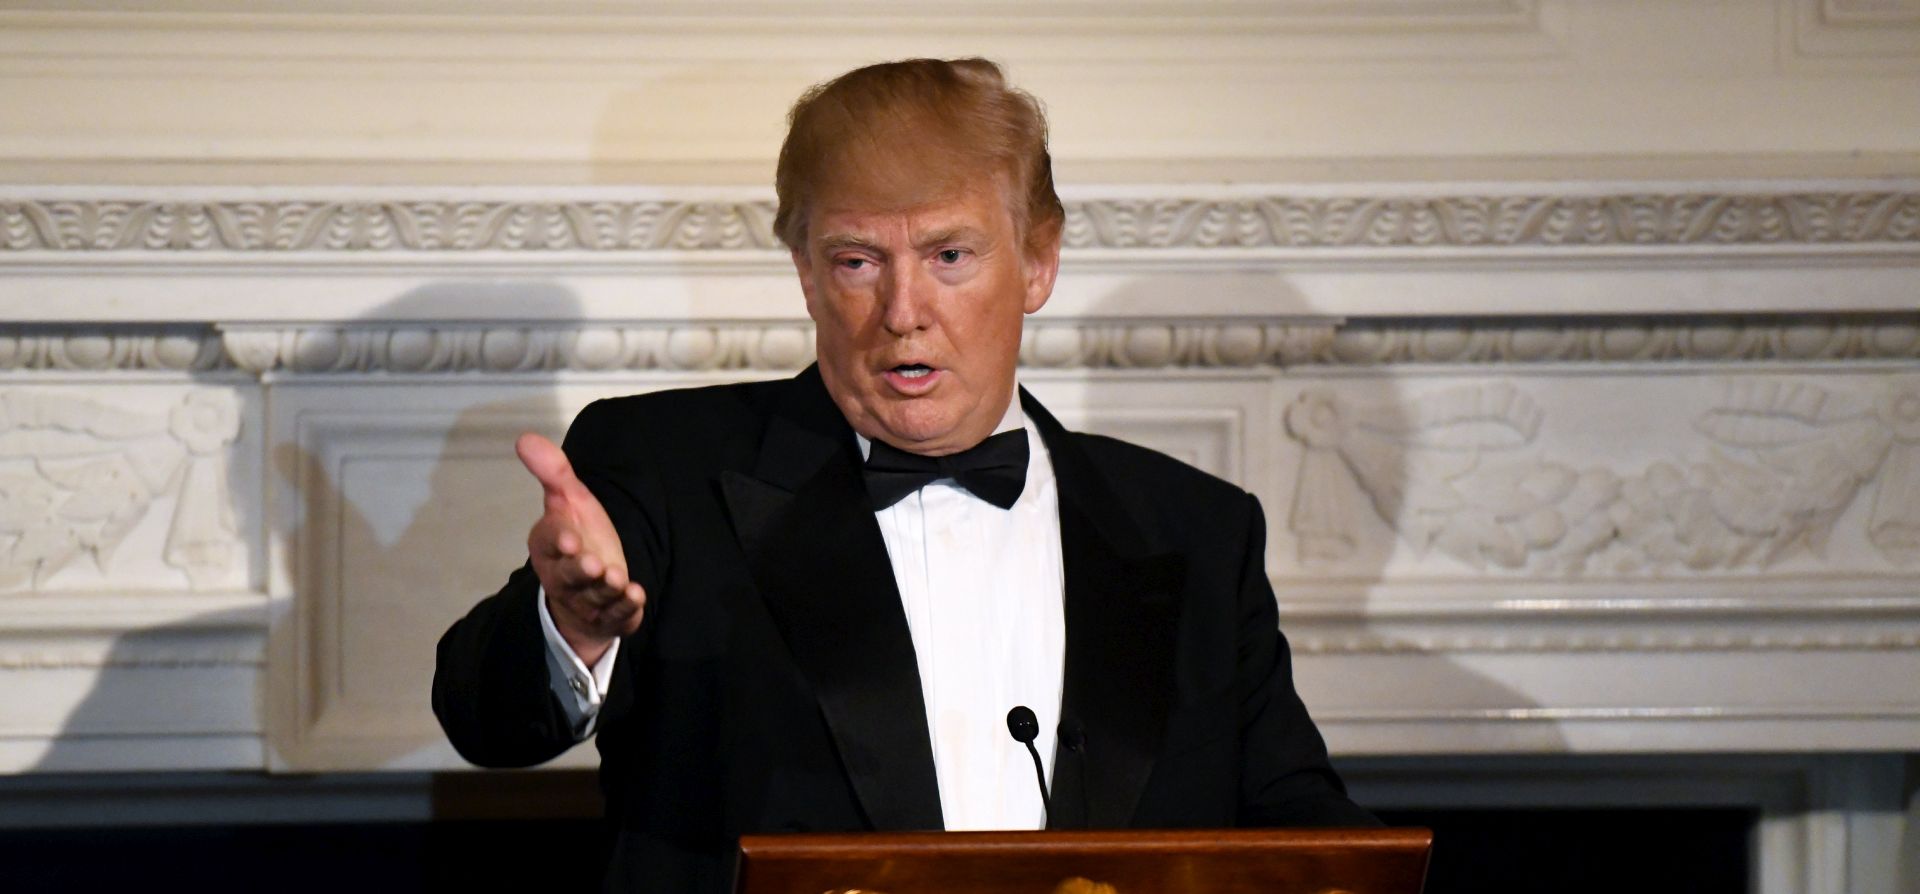 epa06565523 US President Donald J. Trump speaks at the Governors' Ball in the State Dinning Room of the White House in Washington, DC, USA, 25 February 2018.  EPA/OLIVIER DOULIERY / POOL